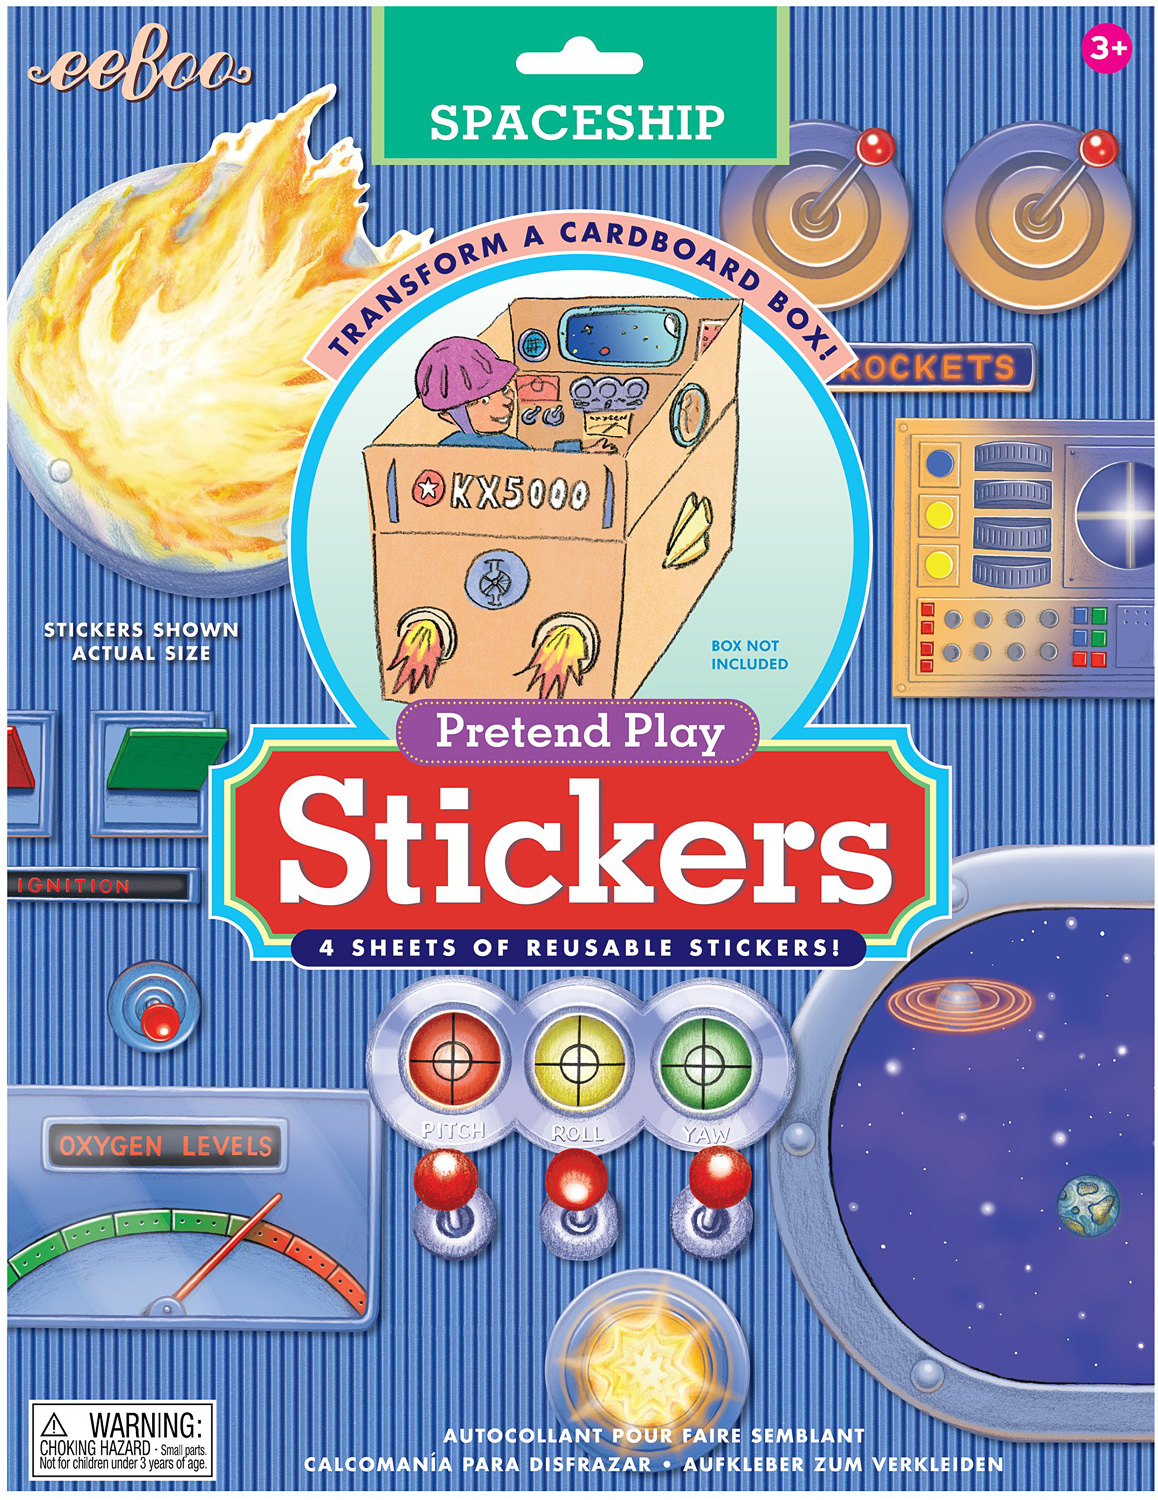 Spaceship Pretend Play Reusable Stickers Turn a Box Into a Spaceship Toy 